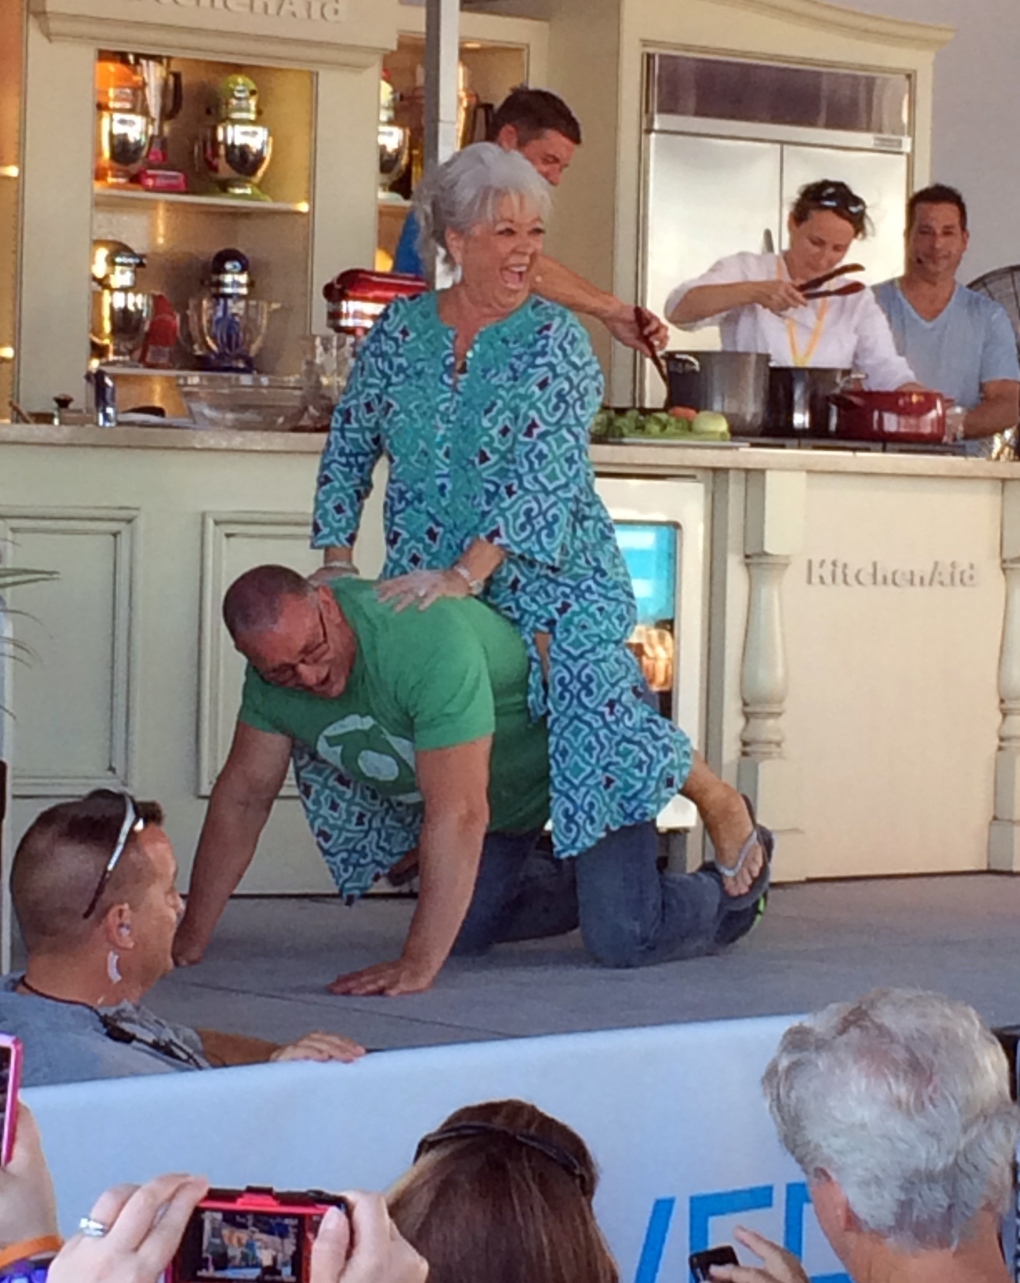 Paula Deen apologizes at cooking demo in Florida